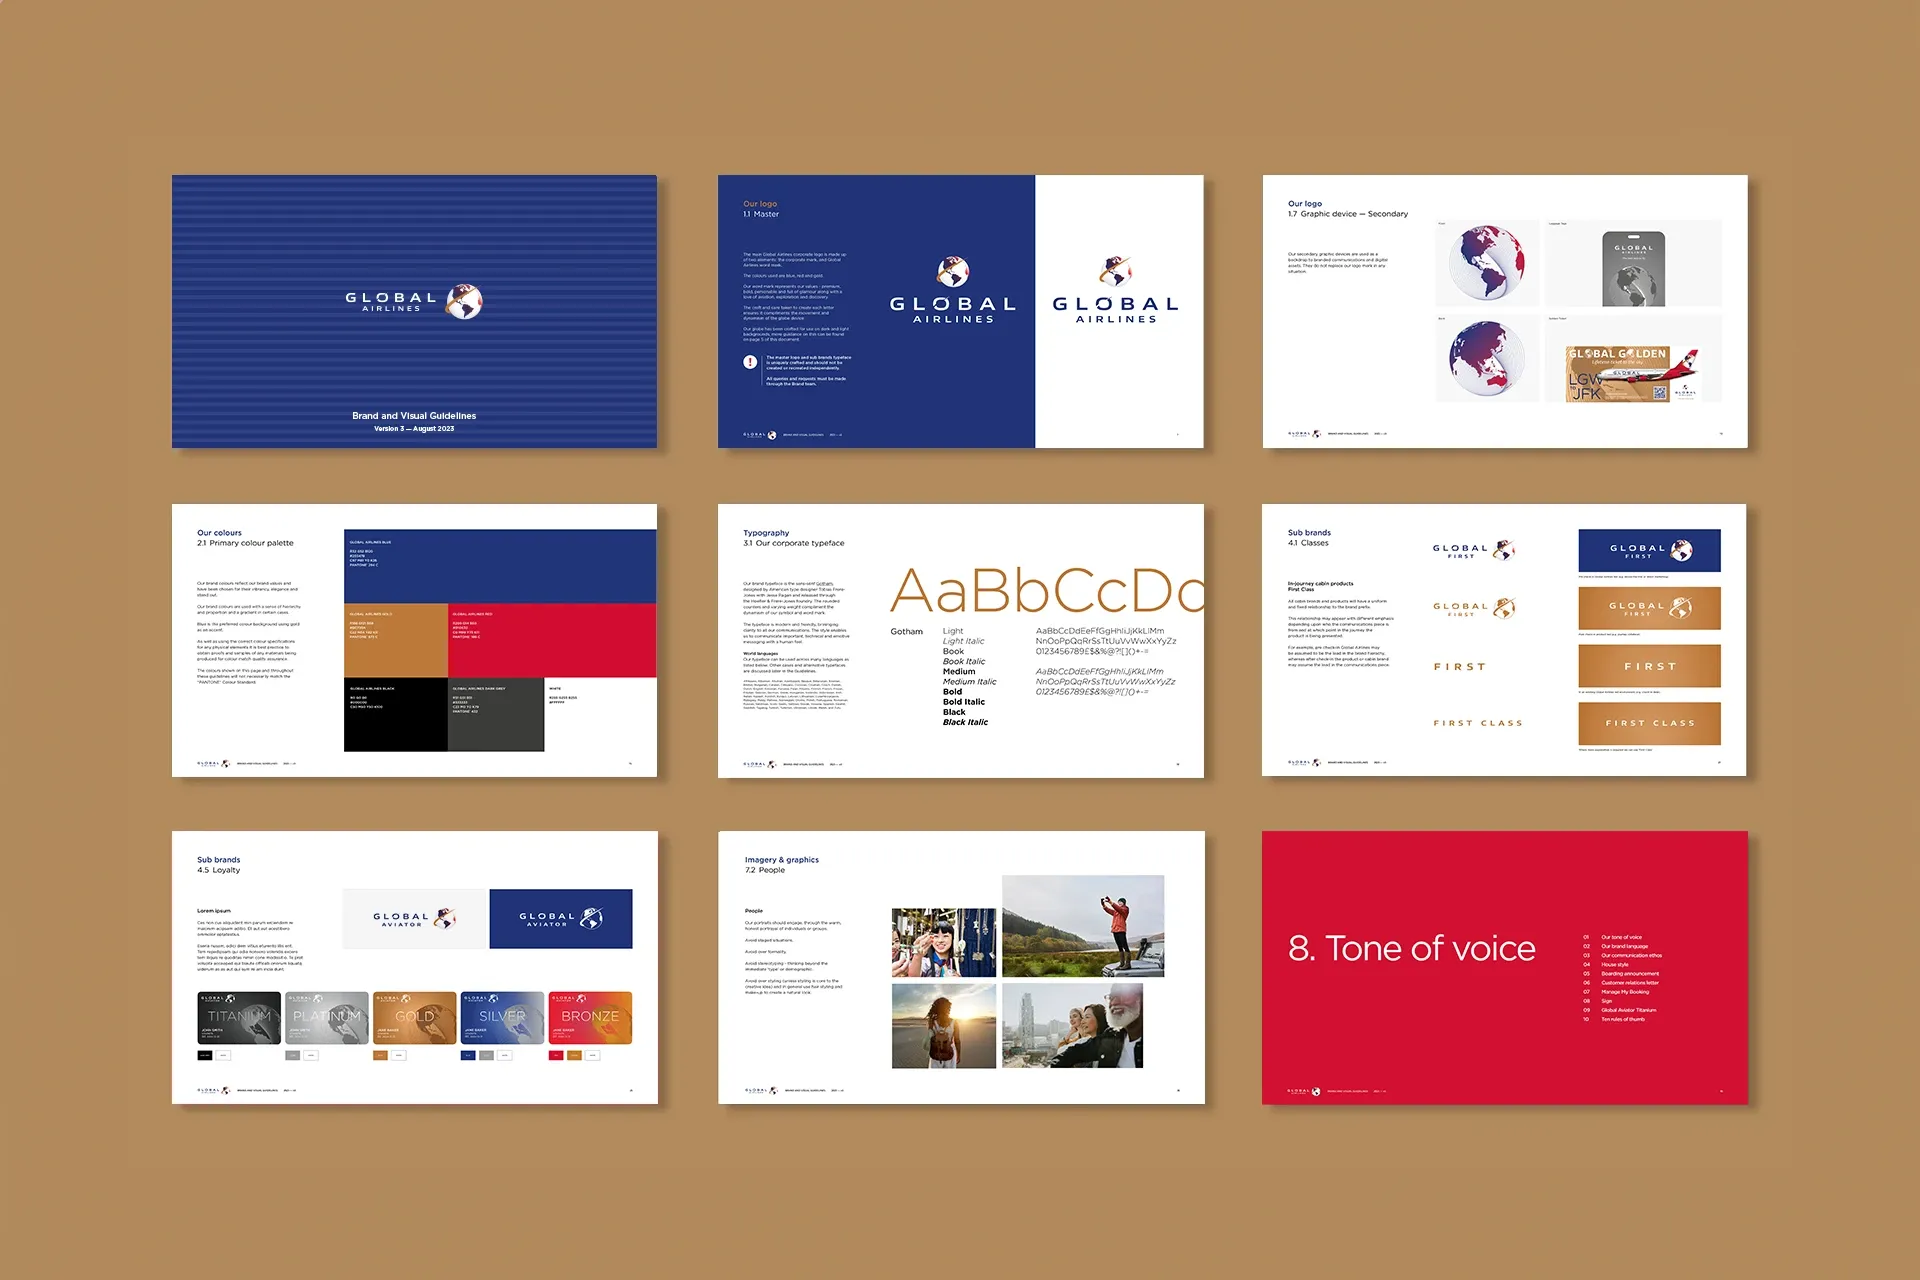 Global Airlines' Brand Guidelines